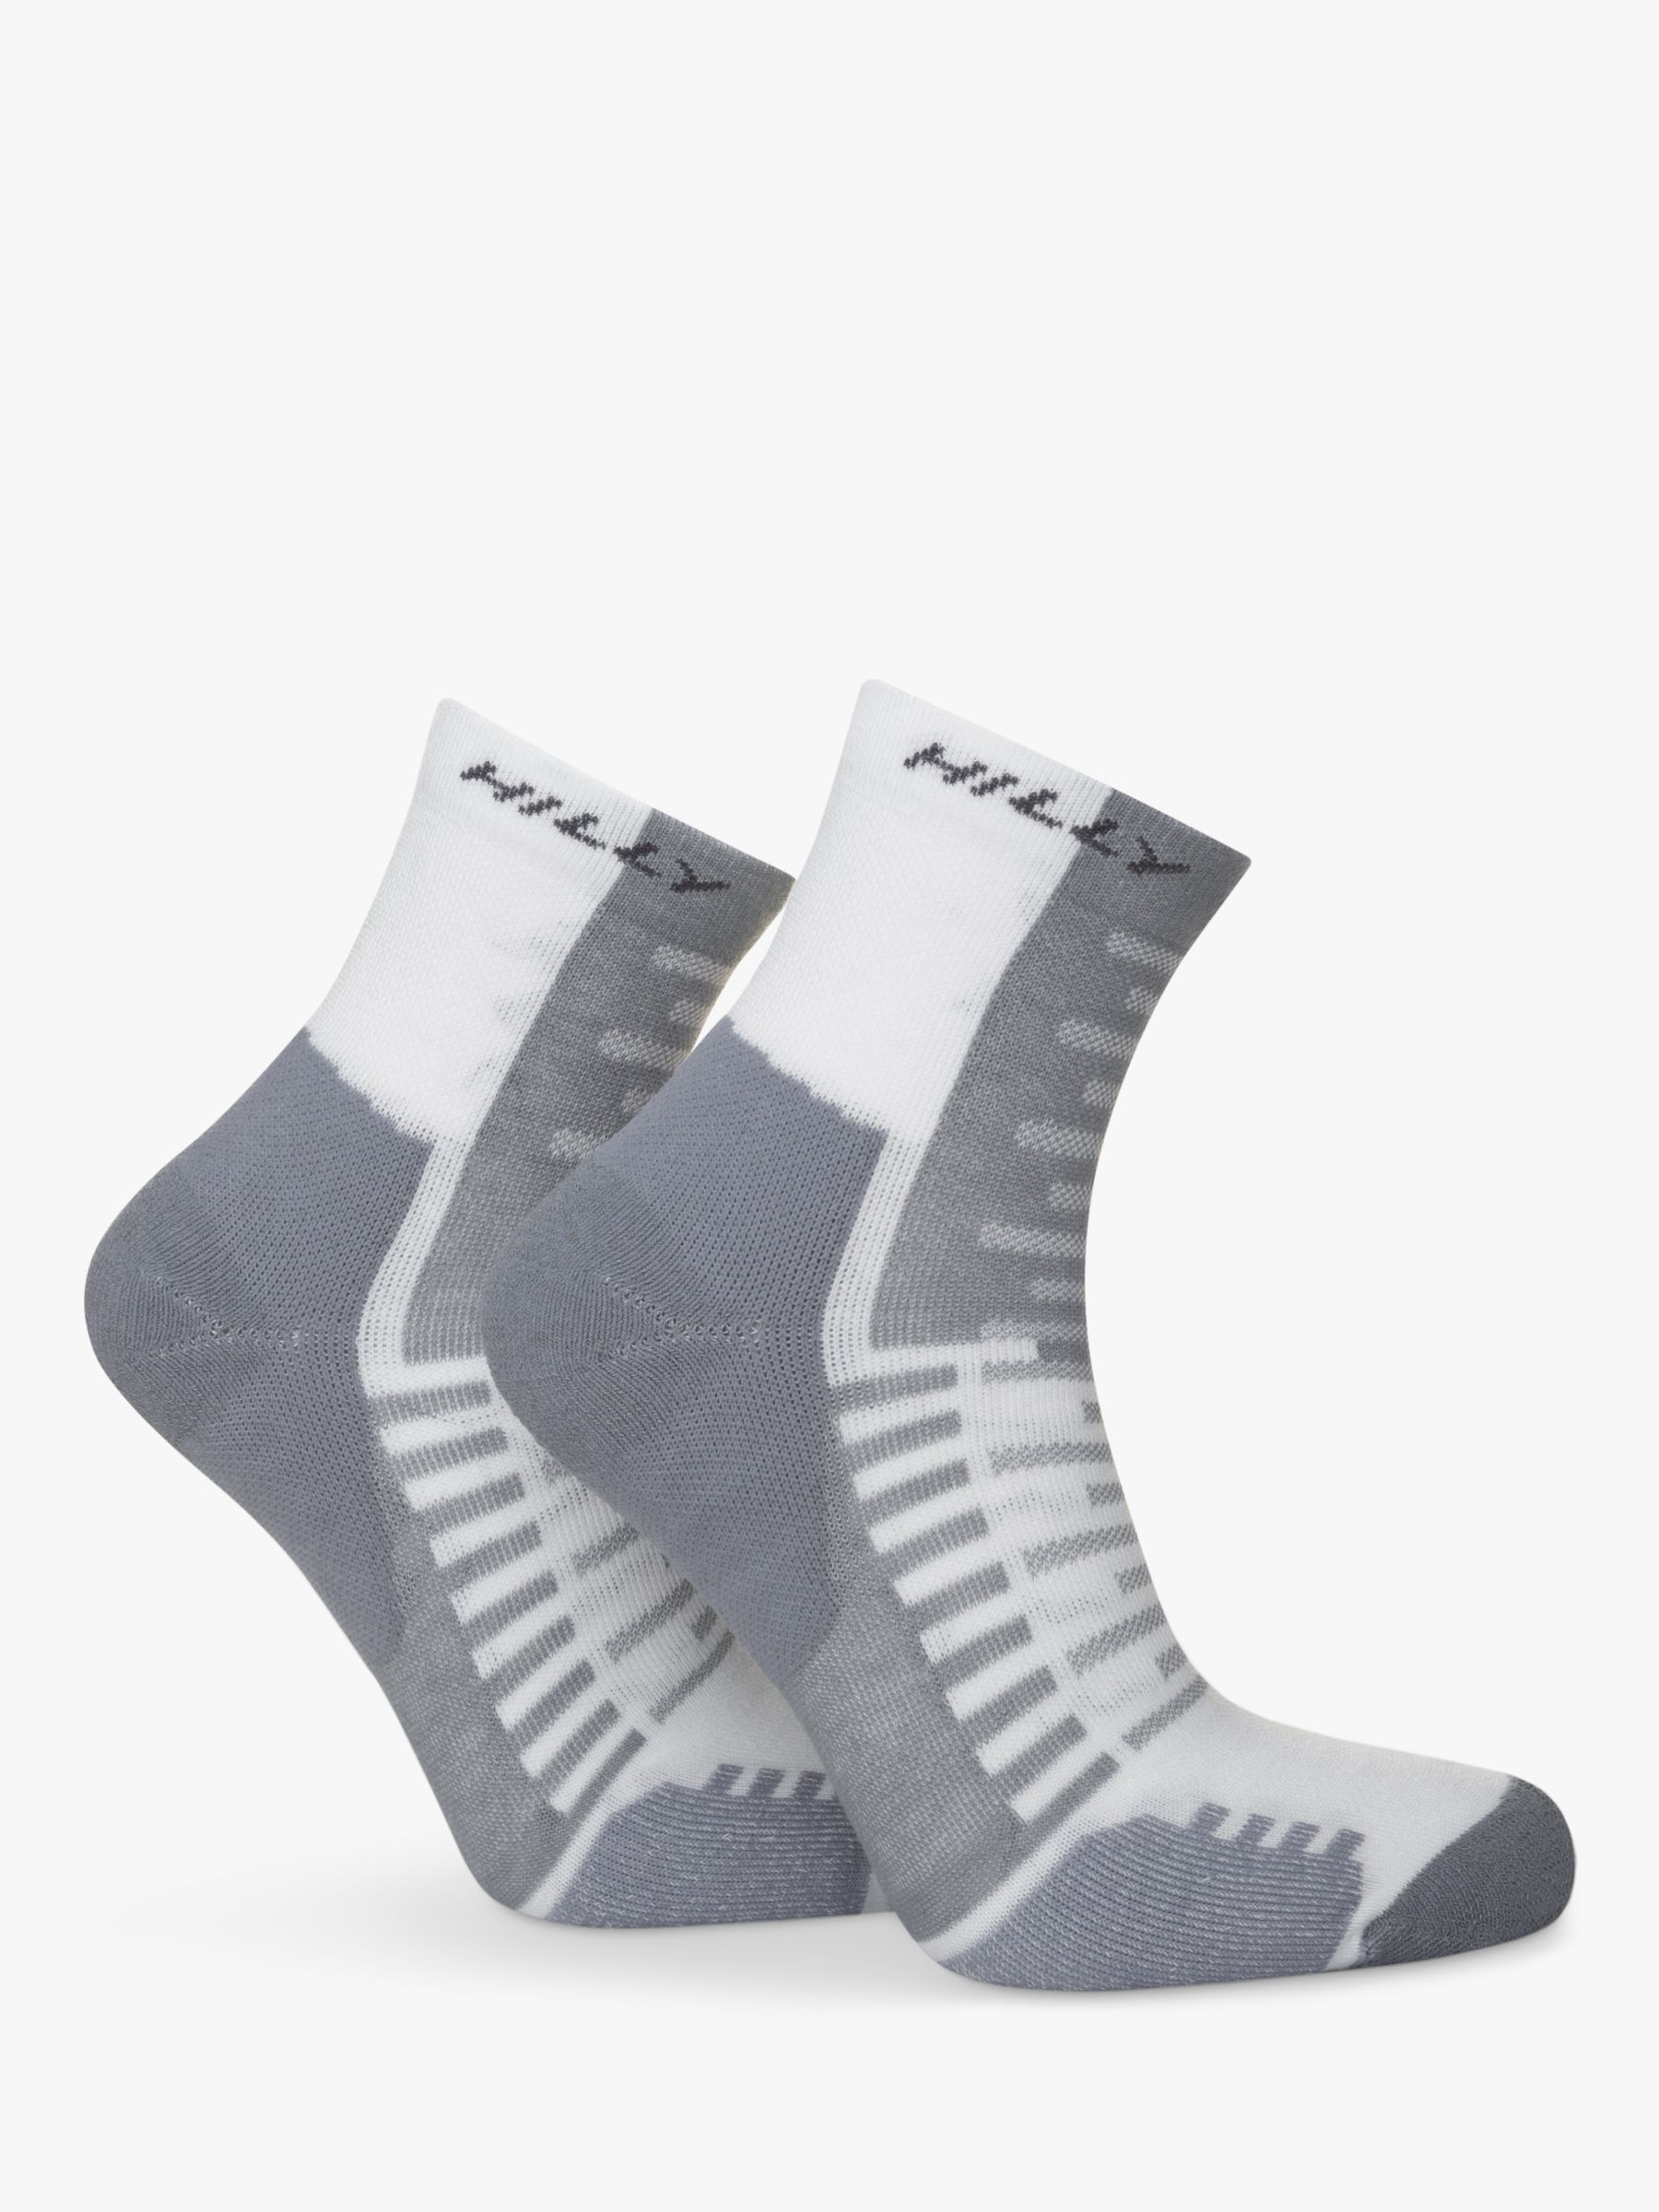 Hilly Active Ankle Running Socks, White/Grey, S